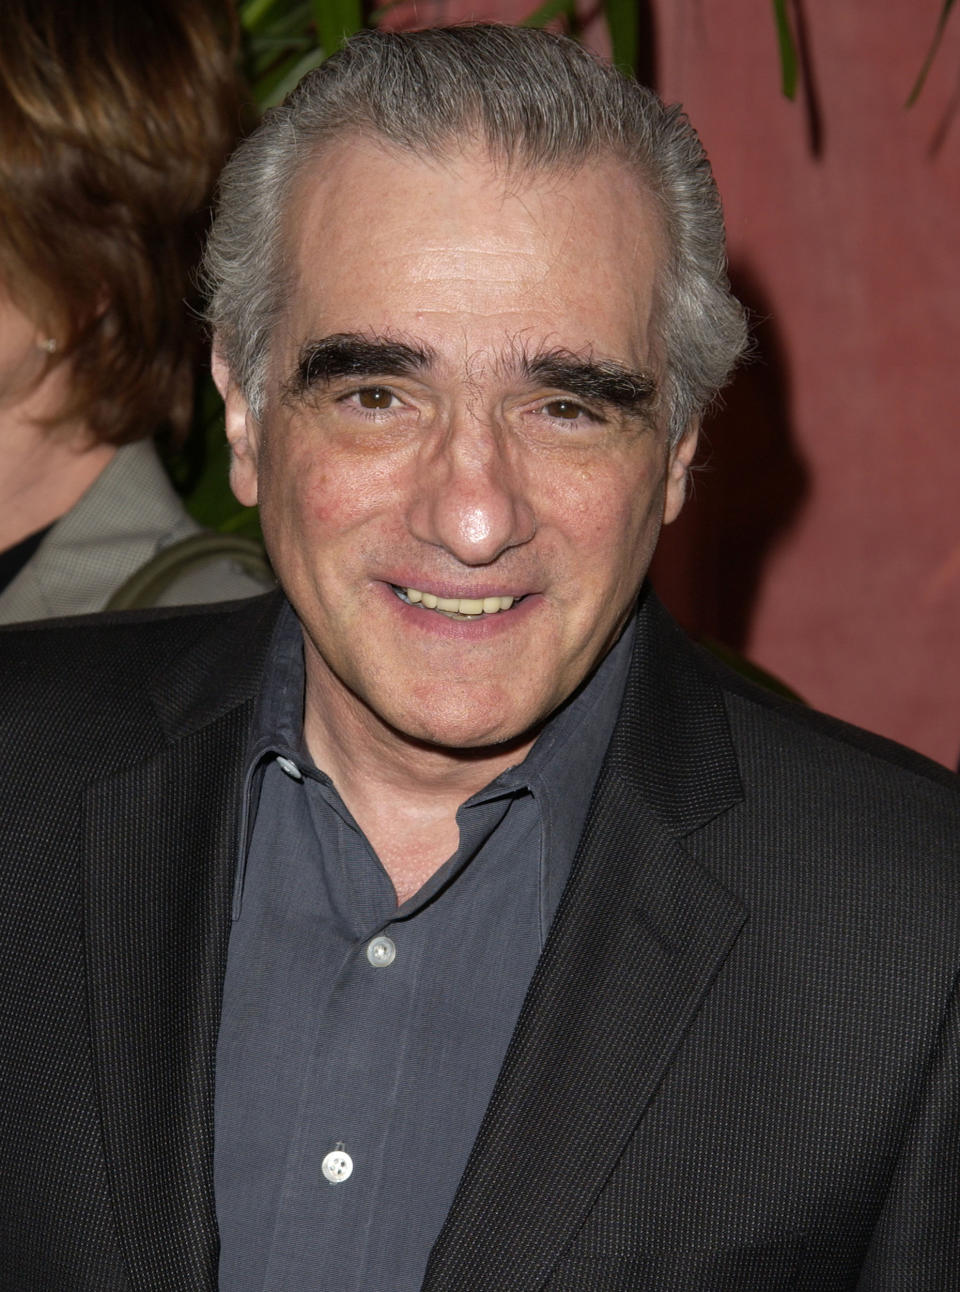 Martin Scorsese at The 75th Annual Academy Awards Nominees Luncheon in Beverly Hills, CA. (Steve Granitz / WireImage)